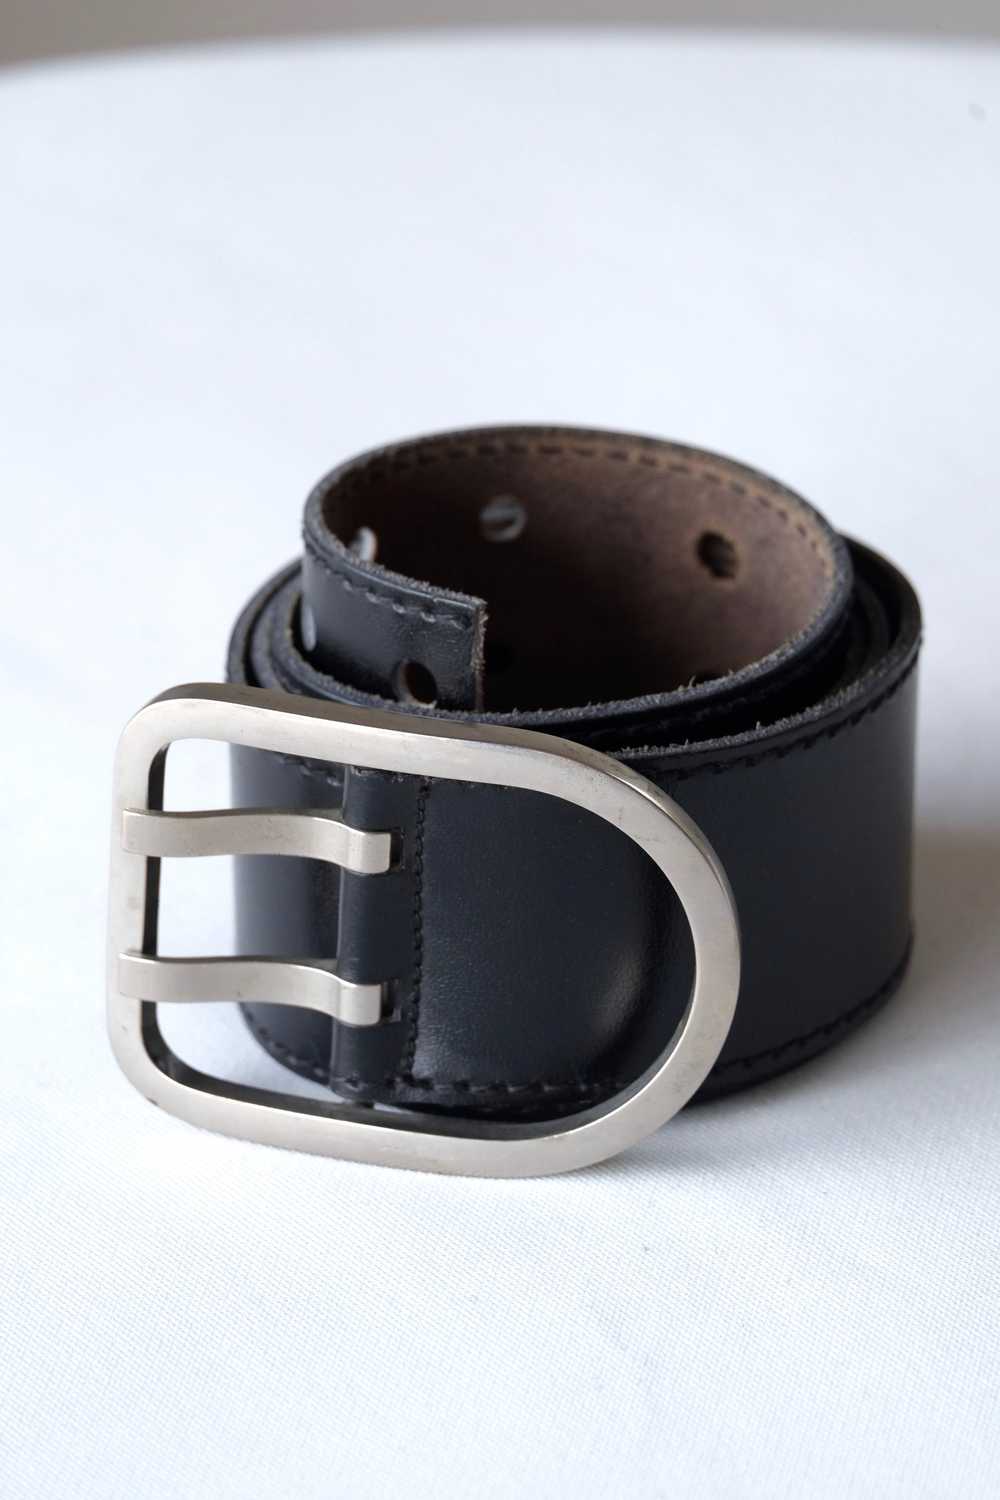 L'AIGLON Double Prong Rounded Buckle Leather Belt - image 2